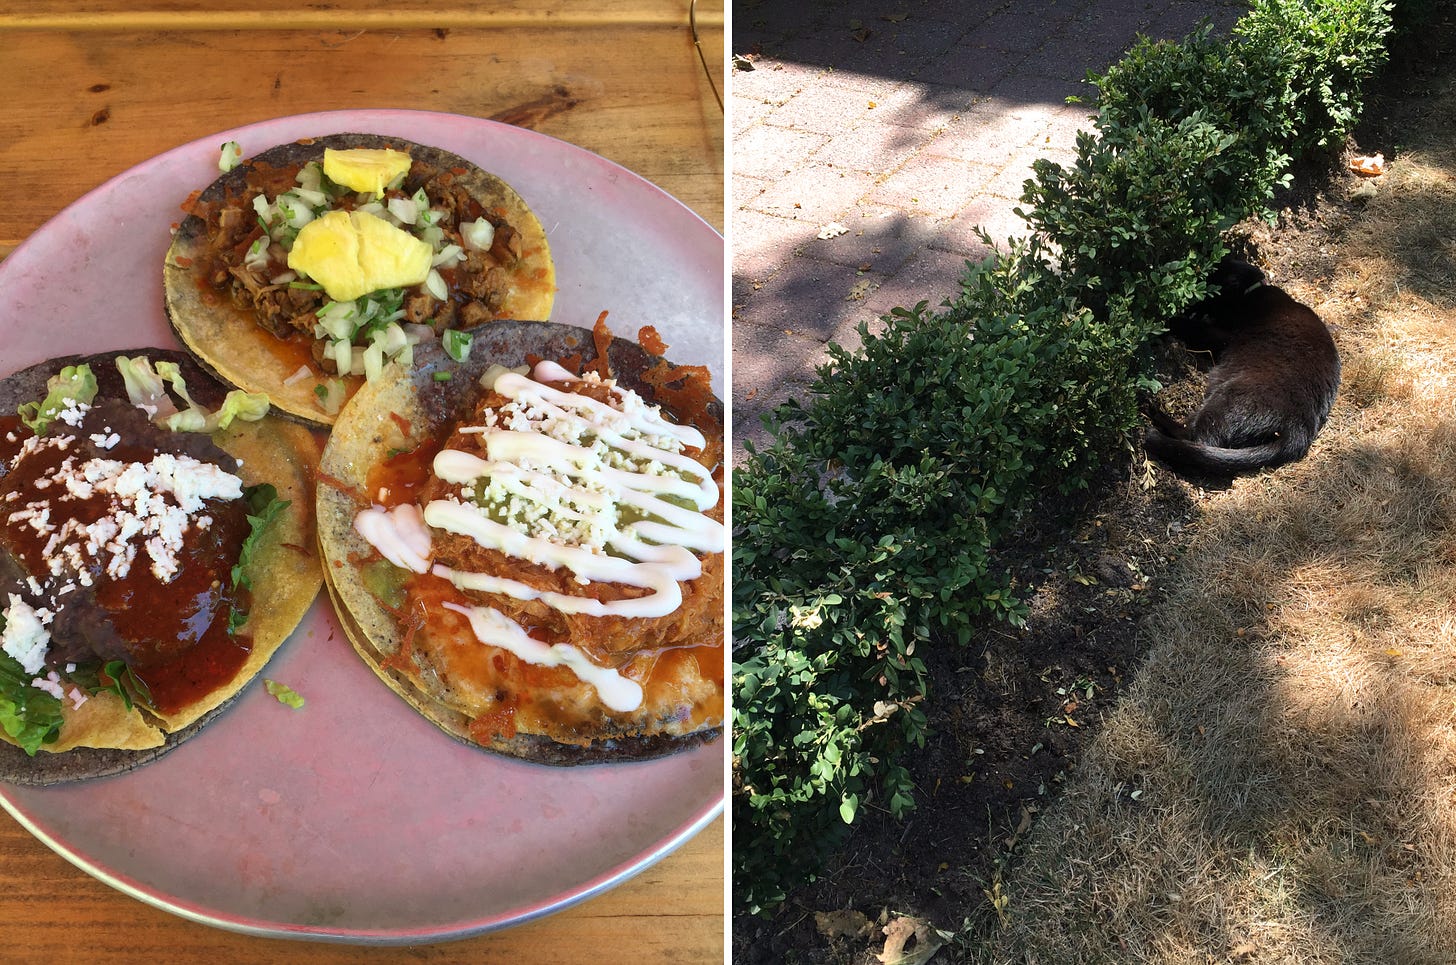 left image: three tacos on a metal plate: al pastor at the top, tinga di pollo bottom right, and enfrijolada bottom left. right image: a black cat lies in a shady patch between a hedge and a dried-out lawn.